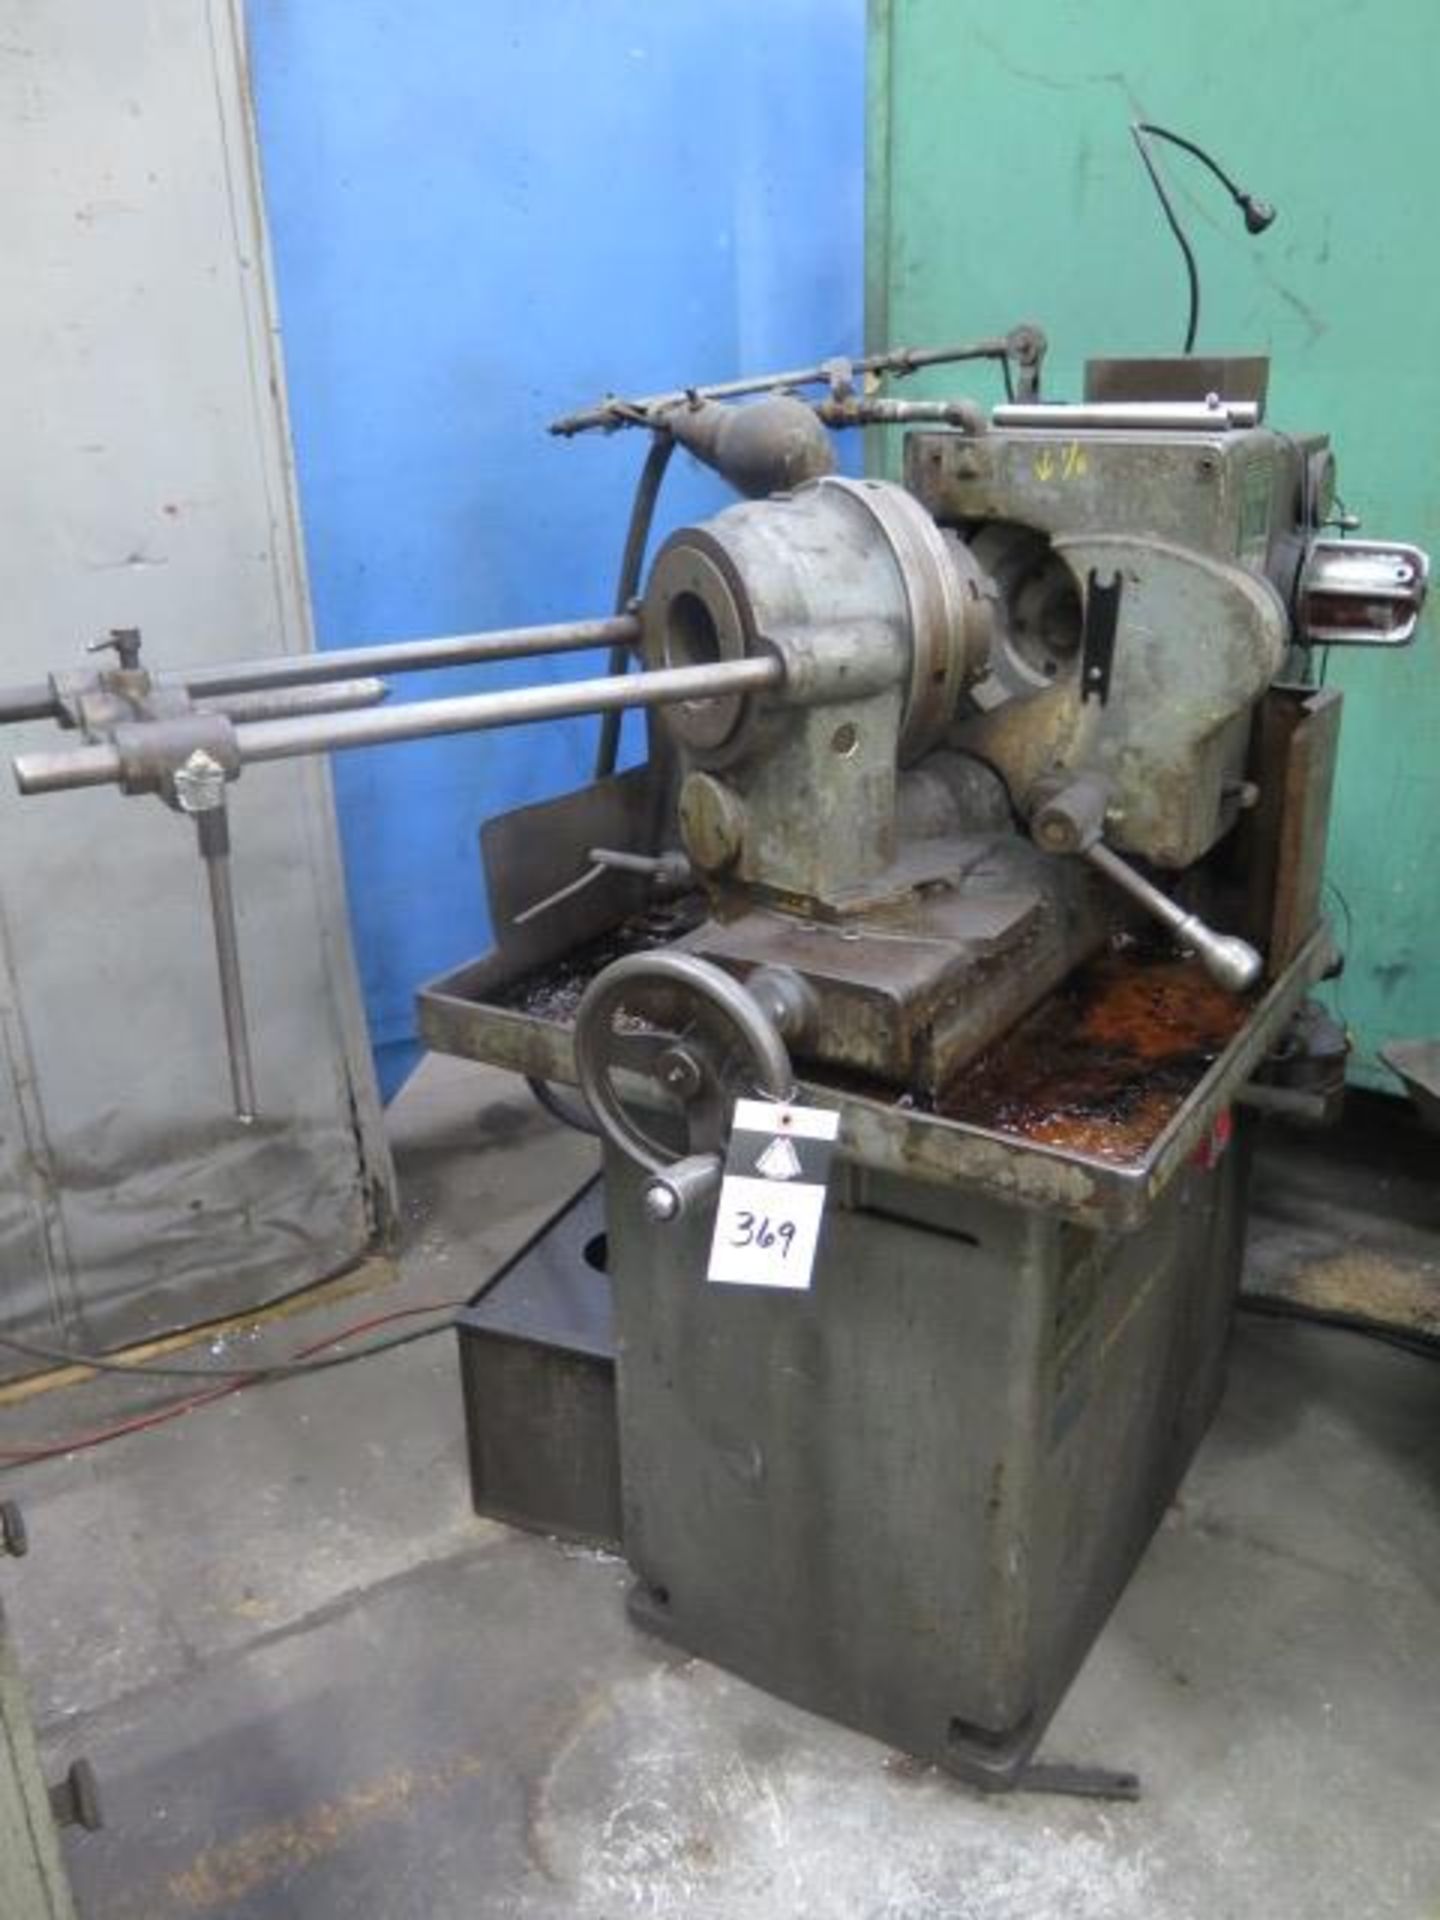 Oliver Adrian mdl. 600 Large Diameter Drill Sharpener s/n G-6618 (SOLD AS-IS - NO WARRANTY)